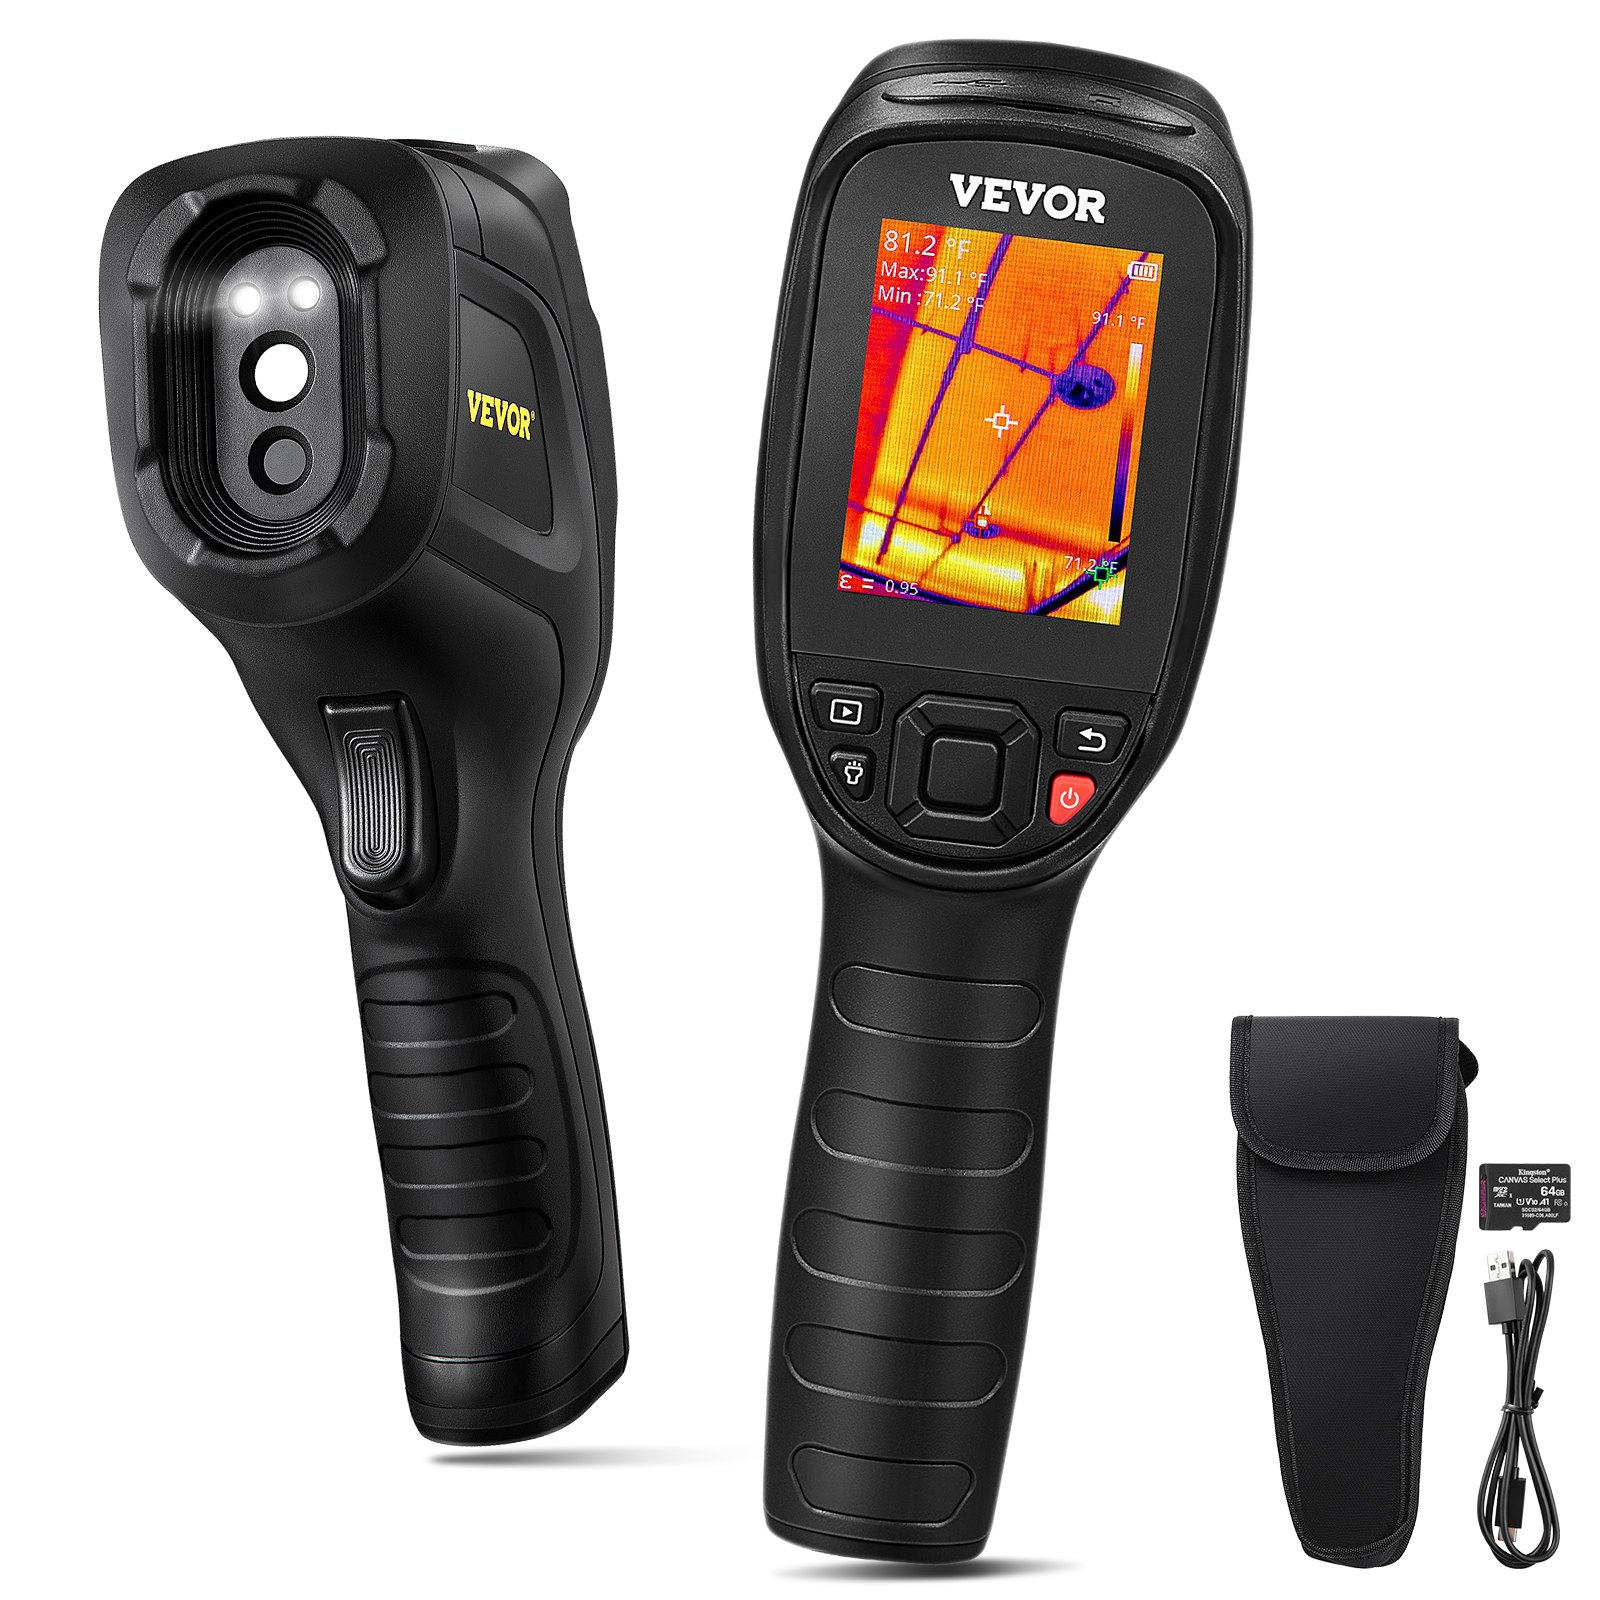 VEVOR Thermal Imaging Camera, 240x180 IR Resolution with 2MP Visual Camera, 20Hz Refresh Rate Infrared Camera with -4℉~1022℉ Temperature Range, 64G Built-in SD Card and Rechargeable Li-ion Battery, Goodies N Stuff